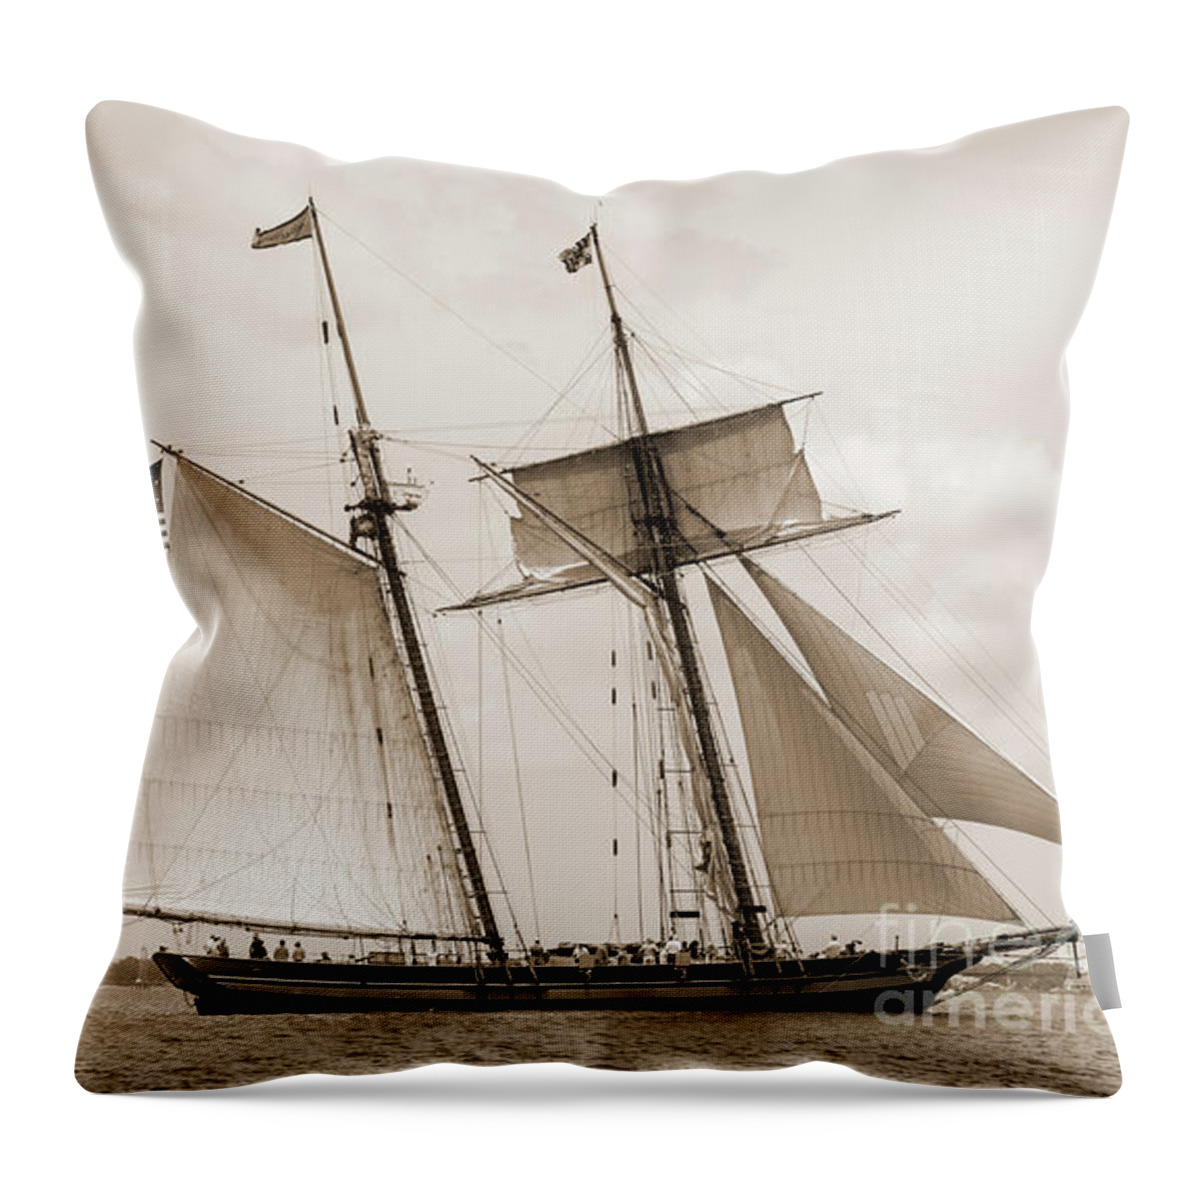 Schooners Pride Of Baltimore And Lynx Throw Pillow featuring the photograph Schooners Pride of Baltimore and Lynx by Dustin K Ryan